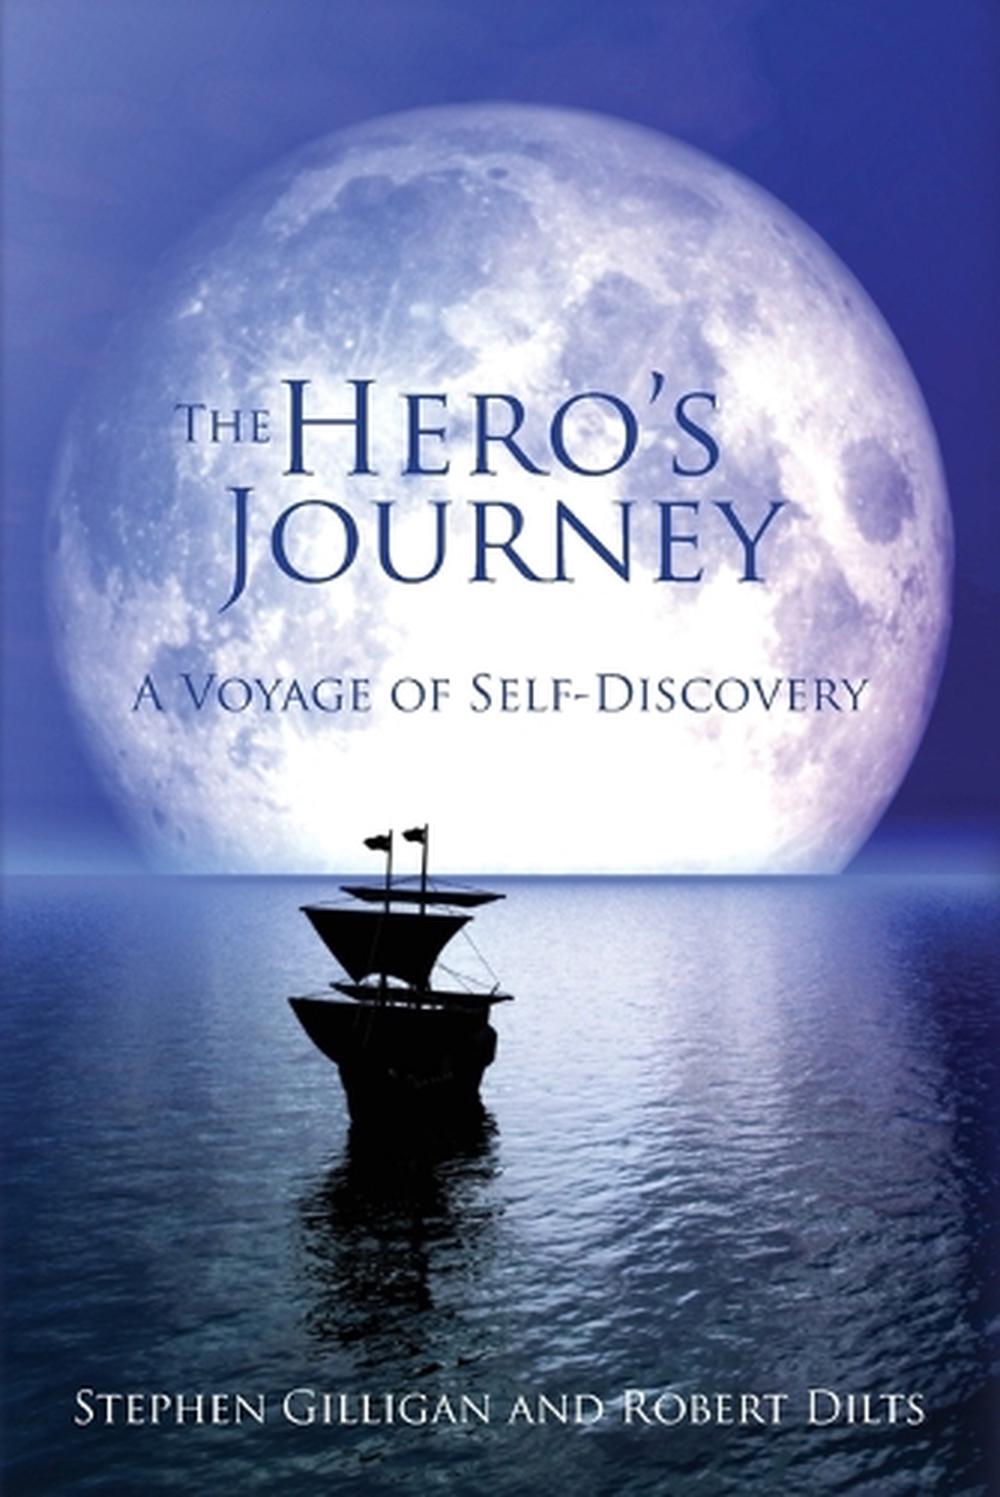 Journey　9781785831621　Hero's　online　The　Gilligan,　Paperback,　by　Buy　The　Stephen　at　Nile